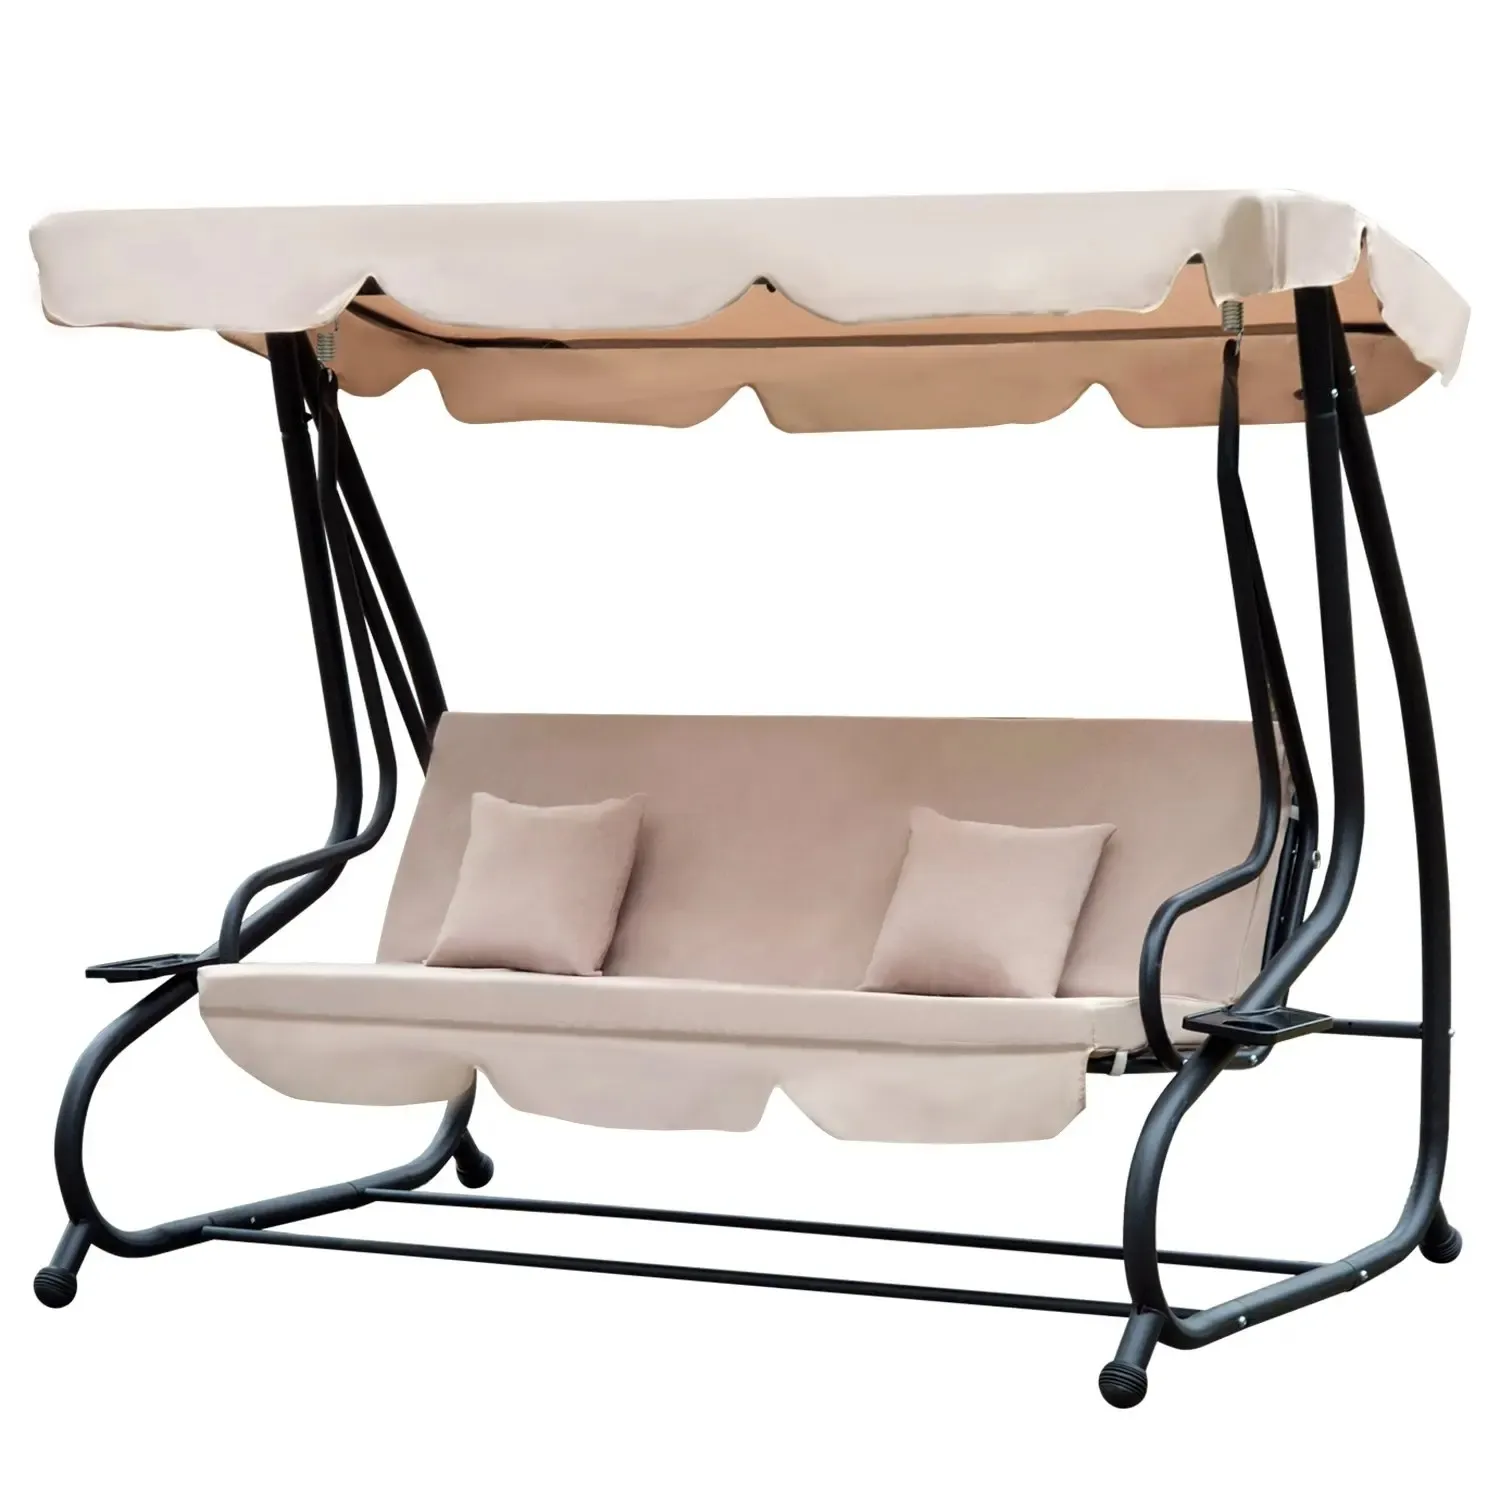 3 Seater Swing Hammock with Removable Canopy Padded Seat with Strong Powder Coated Steel Frame